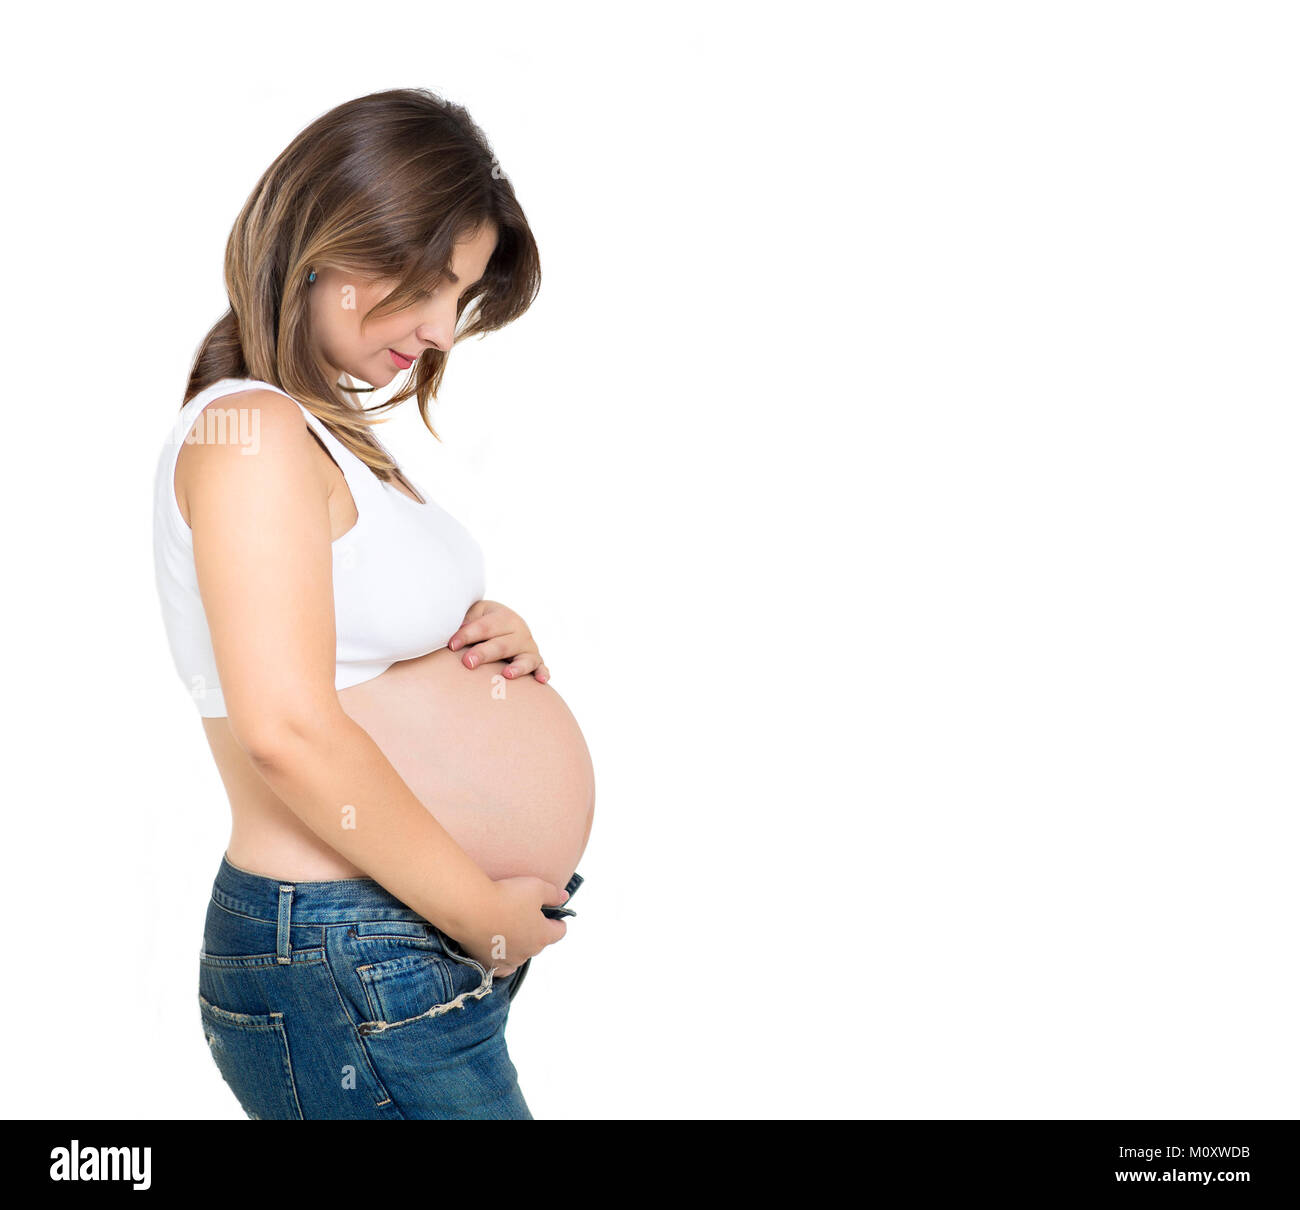 Pretty pregnant woman indoors on white background Stock Photo